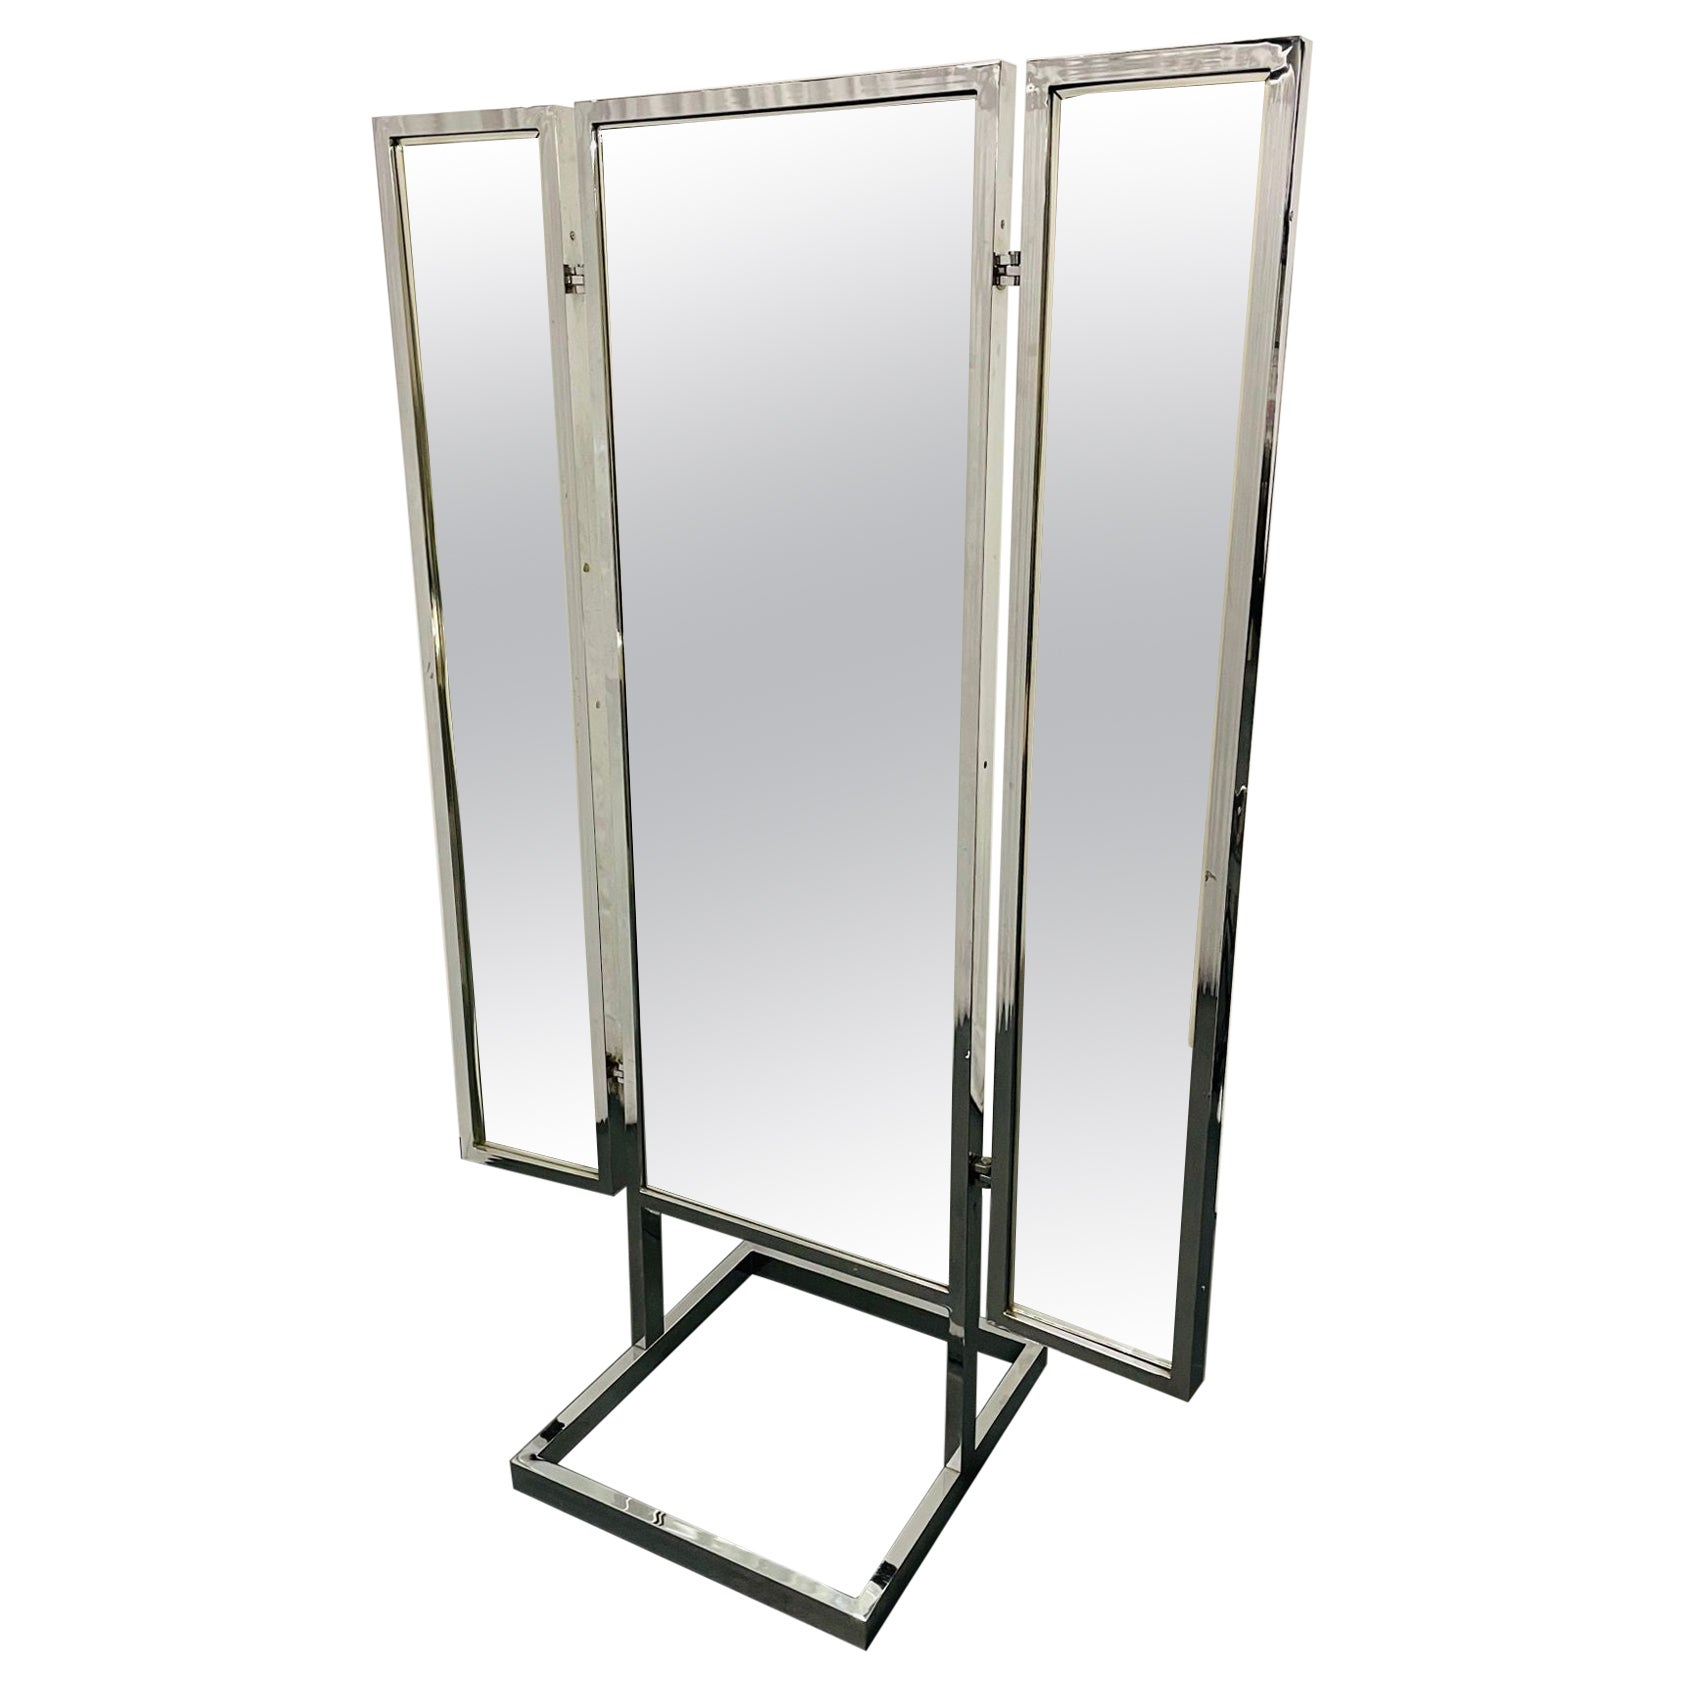 A Mid Century Modern Trifold Cheval Mirror, Steel and Chrome Framed, Reversable